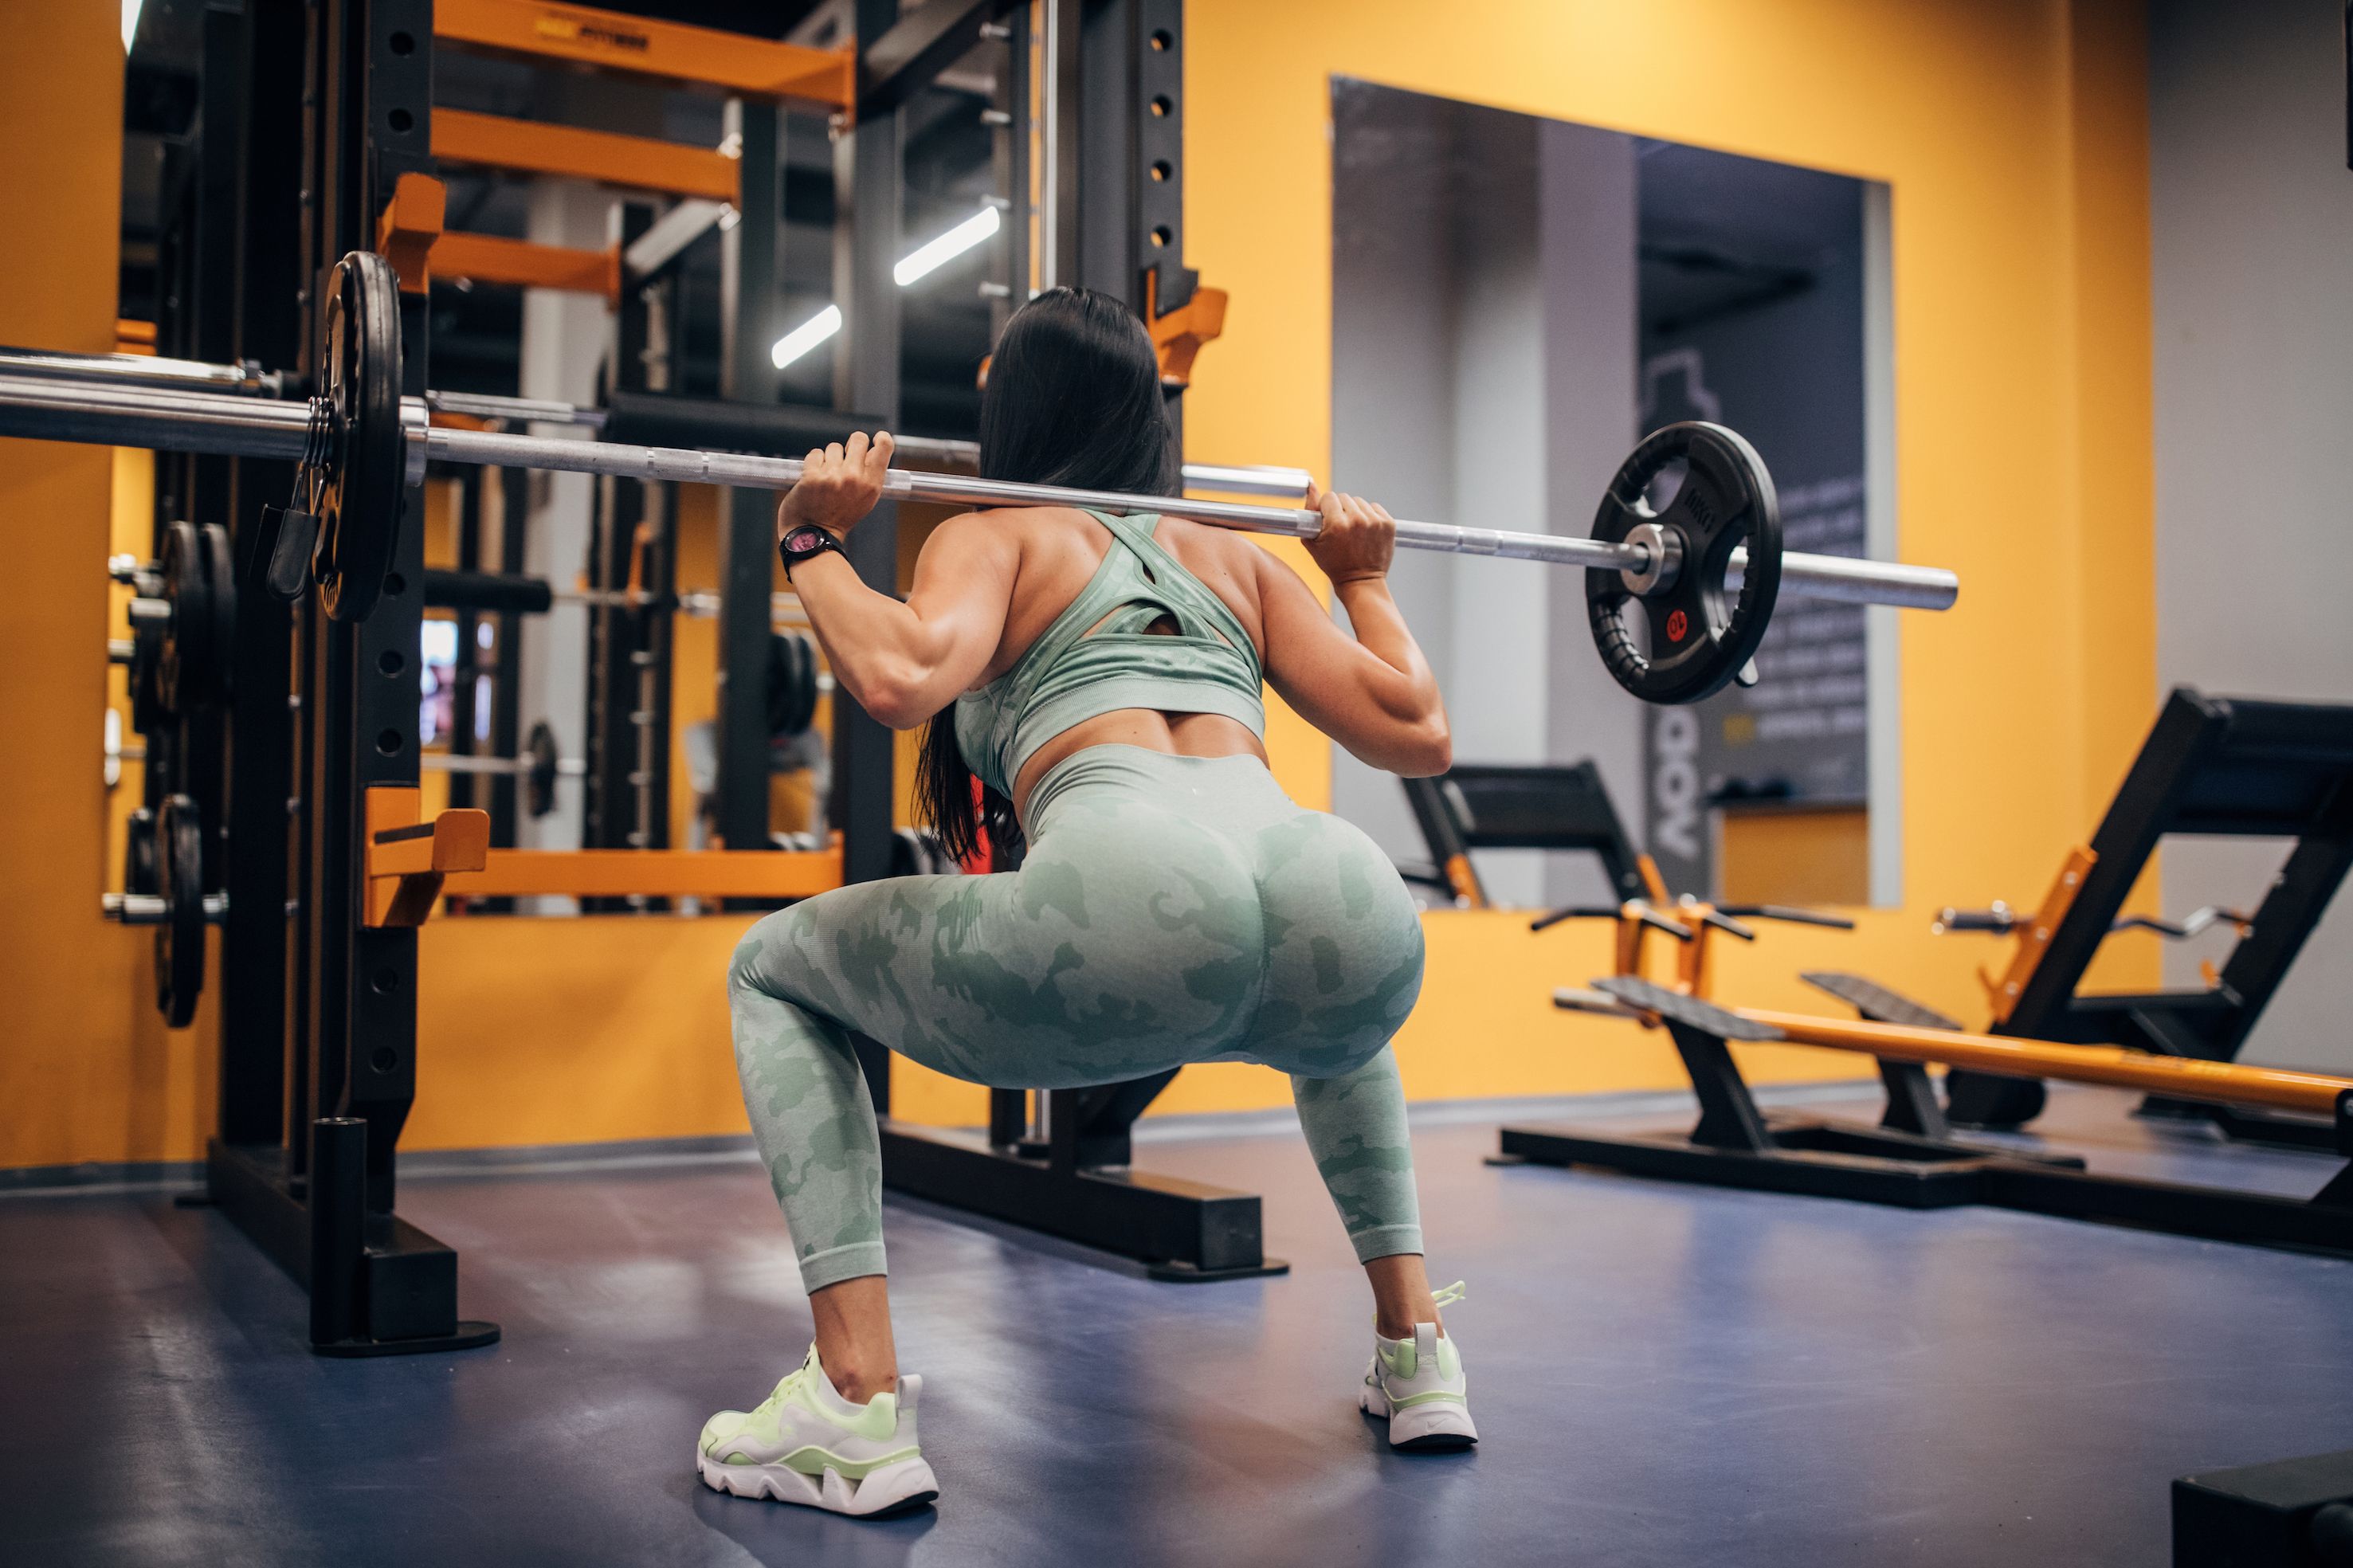 bum-exercises-here-s-the-best-way-to-get-a-bigger-booty-659e7b29e0730.jpg?crop\u003d0.657xw:0.988xh;0.122xw,0\u0026resize\u003d1200:*